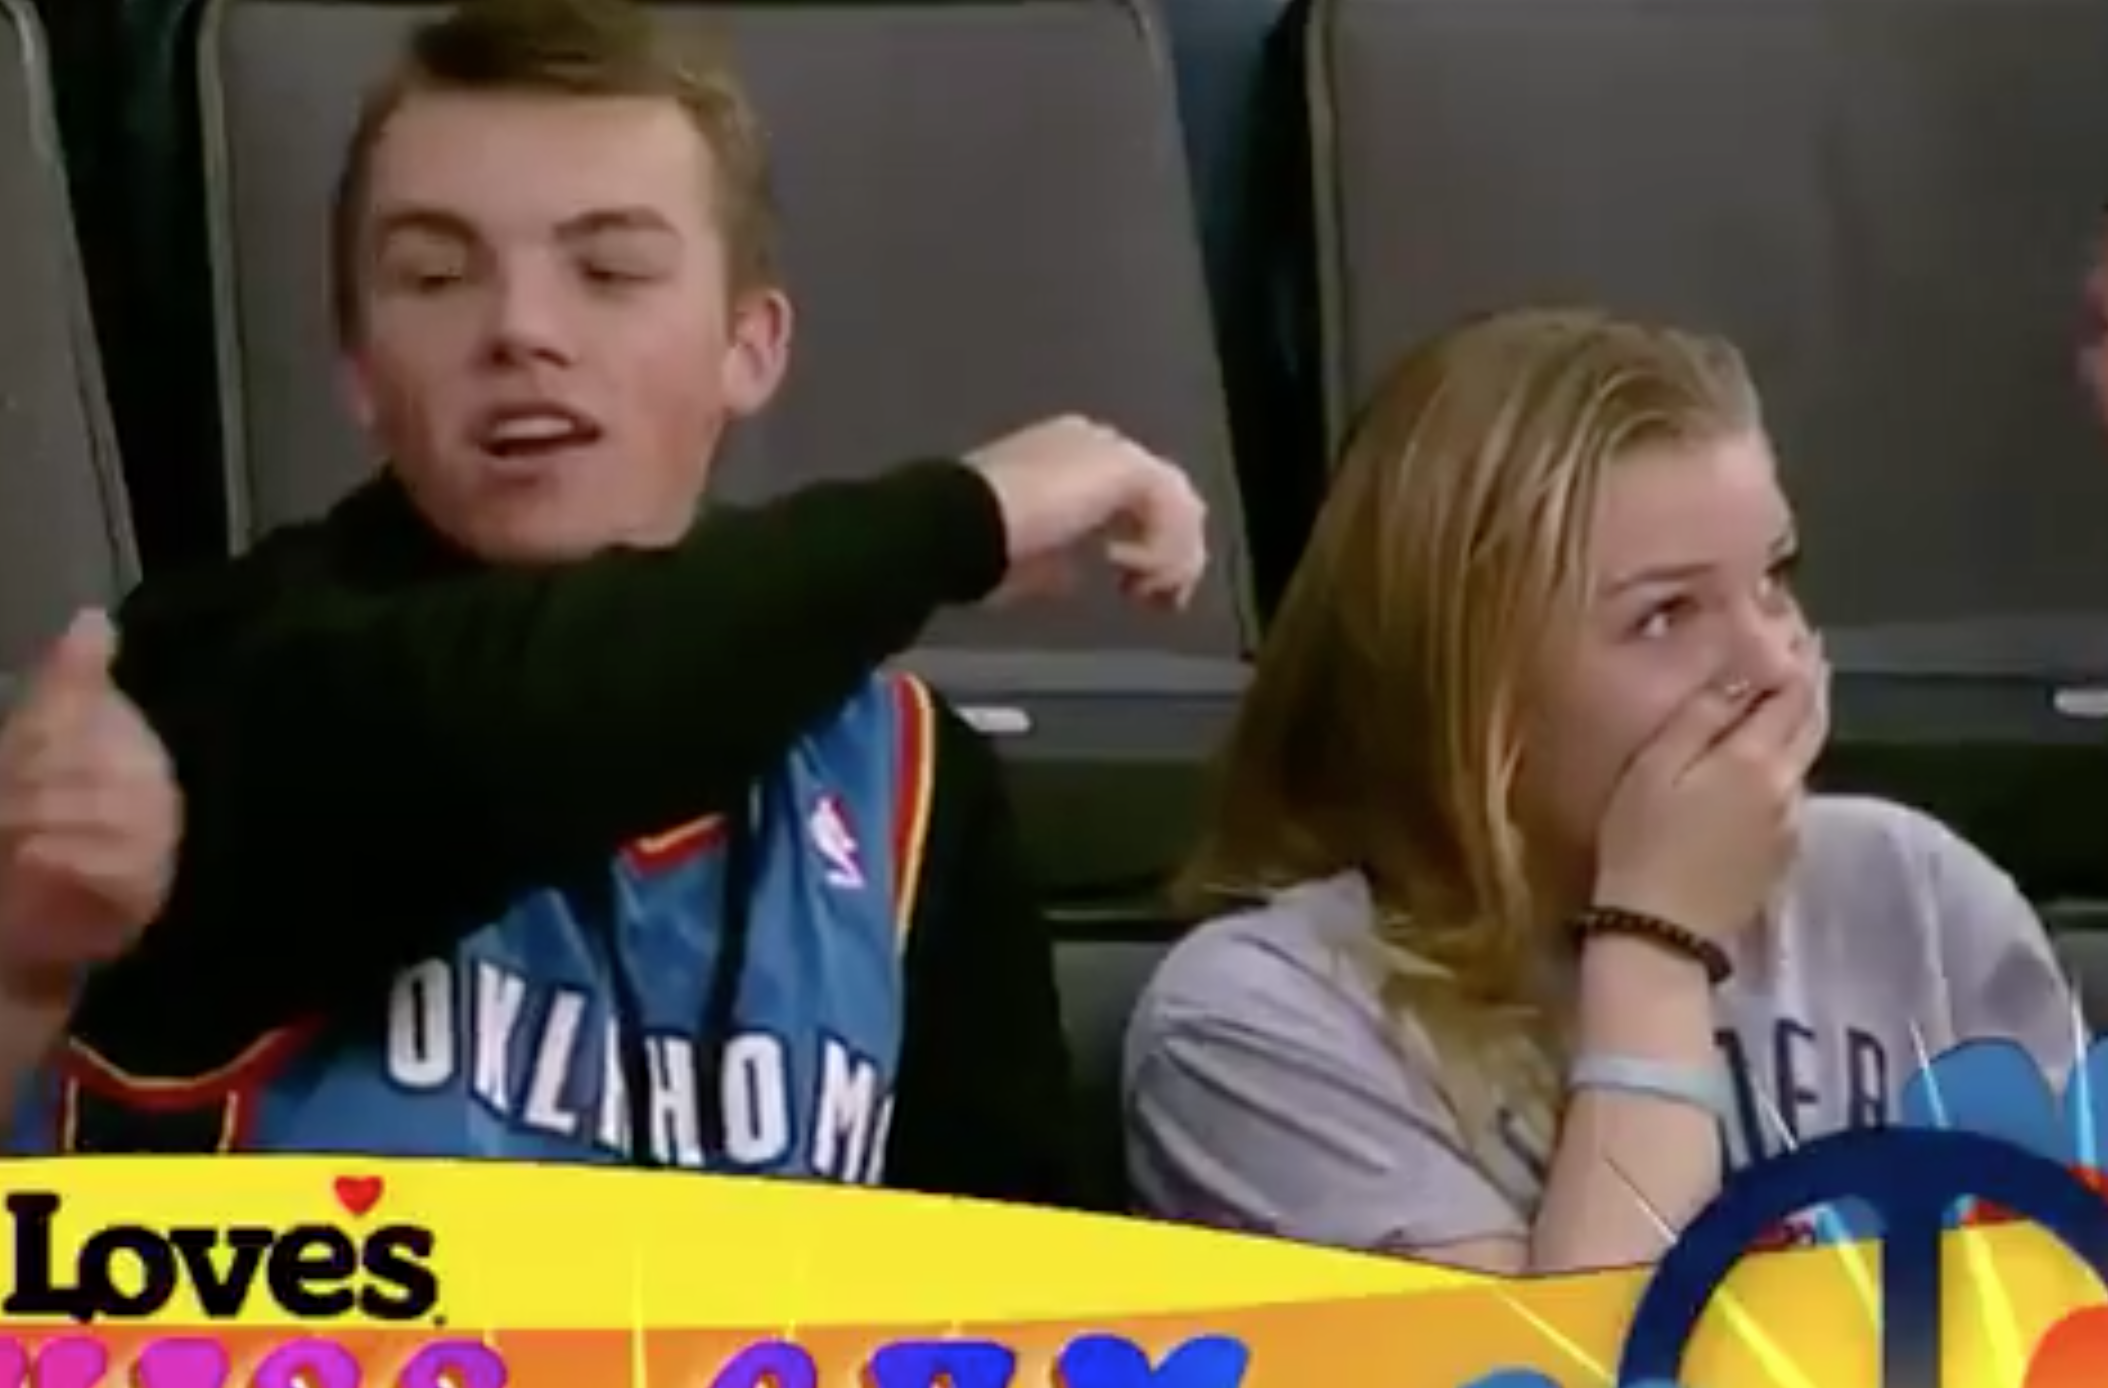 Brother Sister Shown On Kiss Cam Makes For Awkward Moment Video